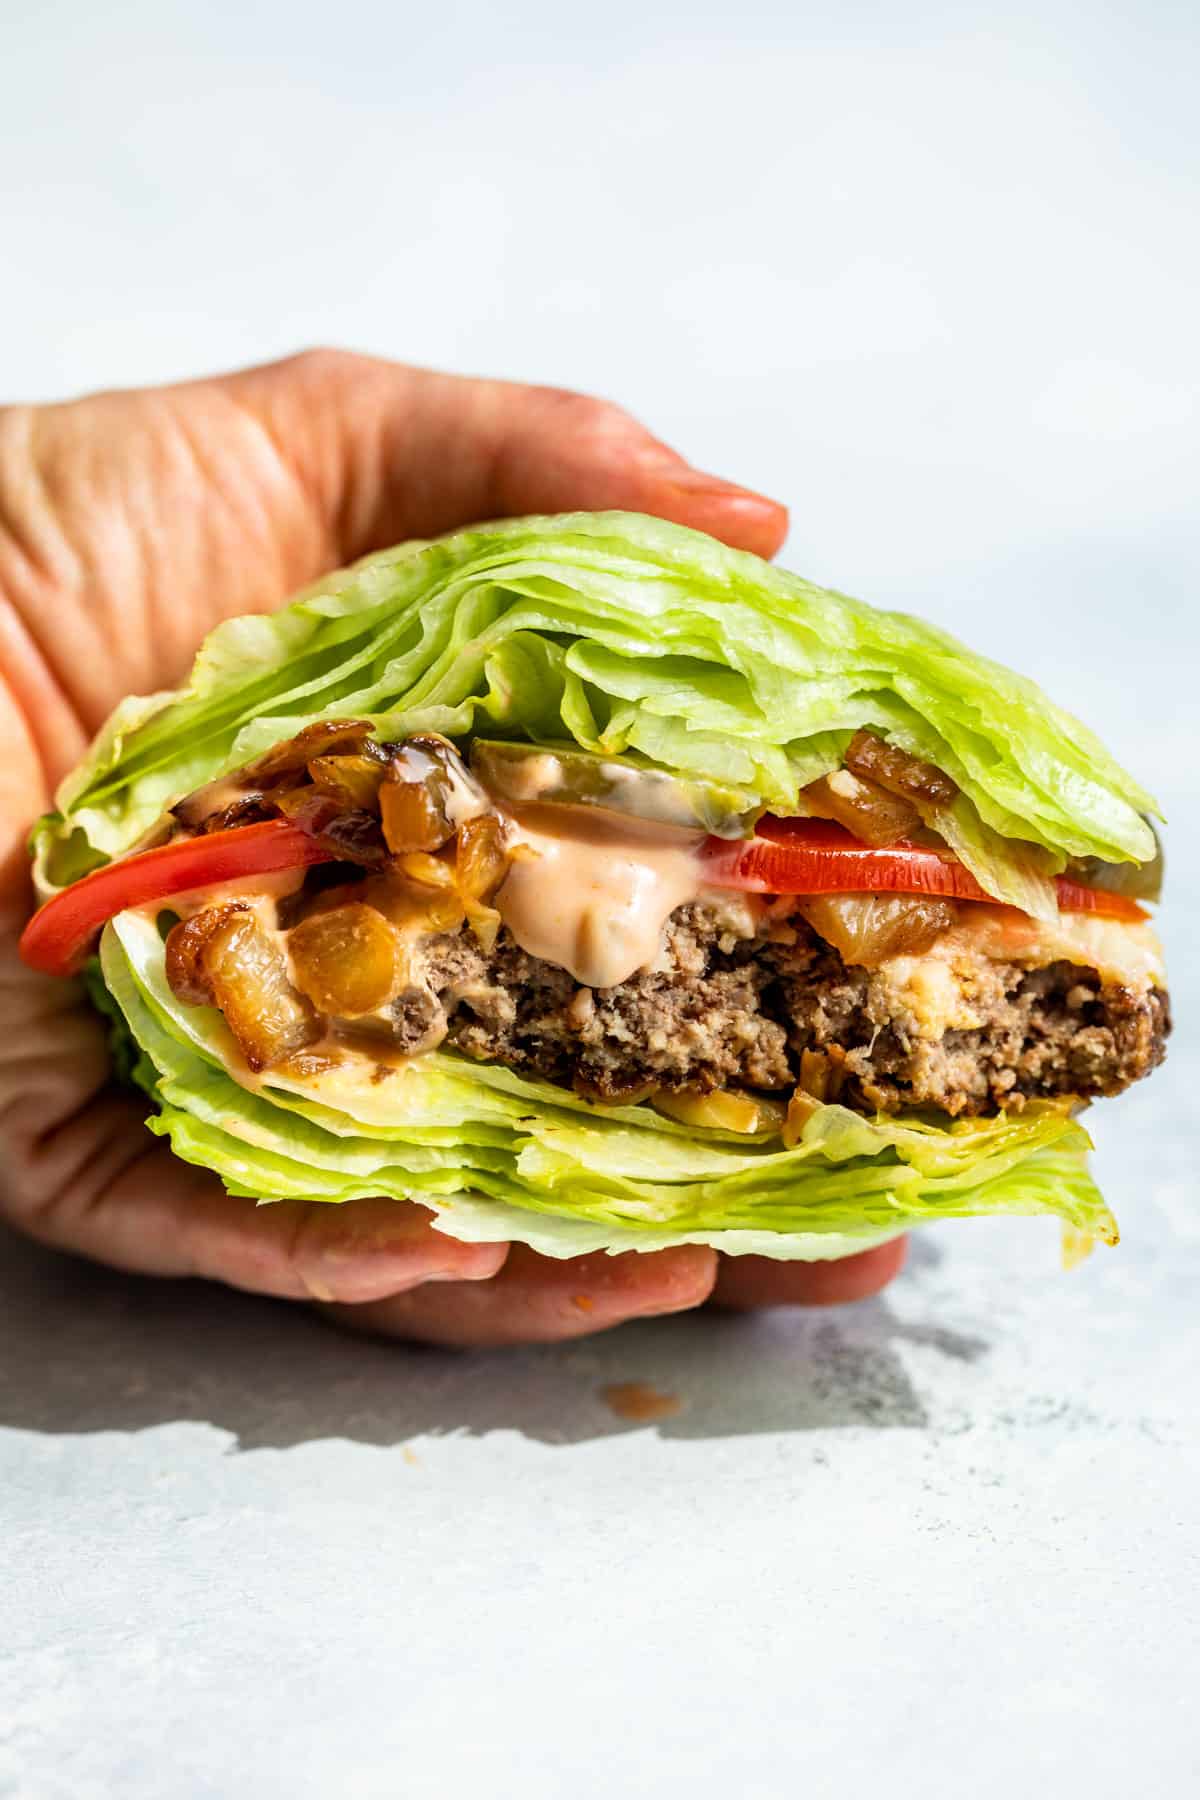 A hand holding a In and Out Burger Lettuce Wrap with bites taken out of it.